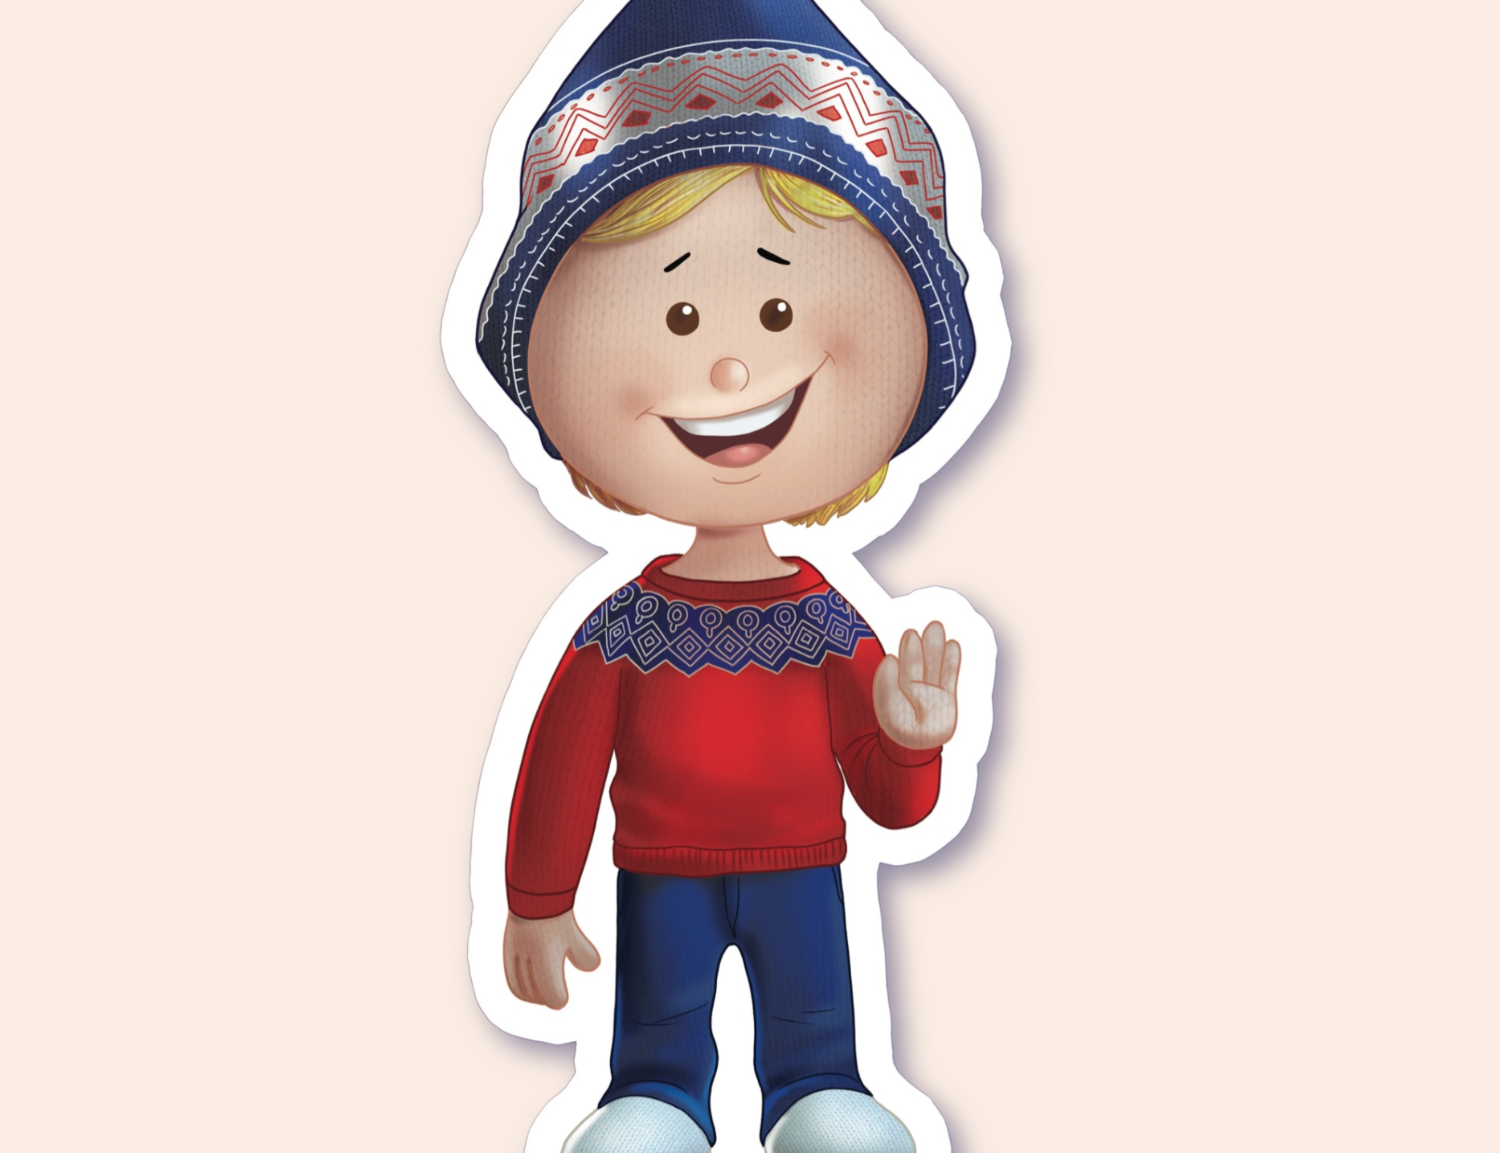 A sticker of a child in a cozy Nordic-style sweater and blue jeans, giving a friendly wave, wearing a hat with a Nordic pattern.